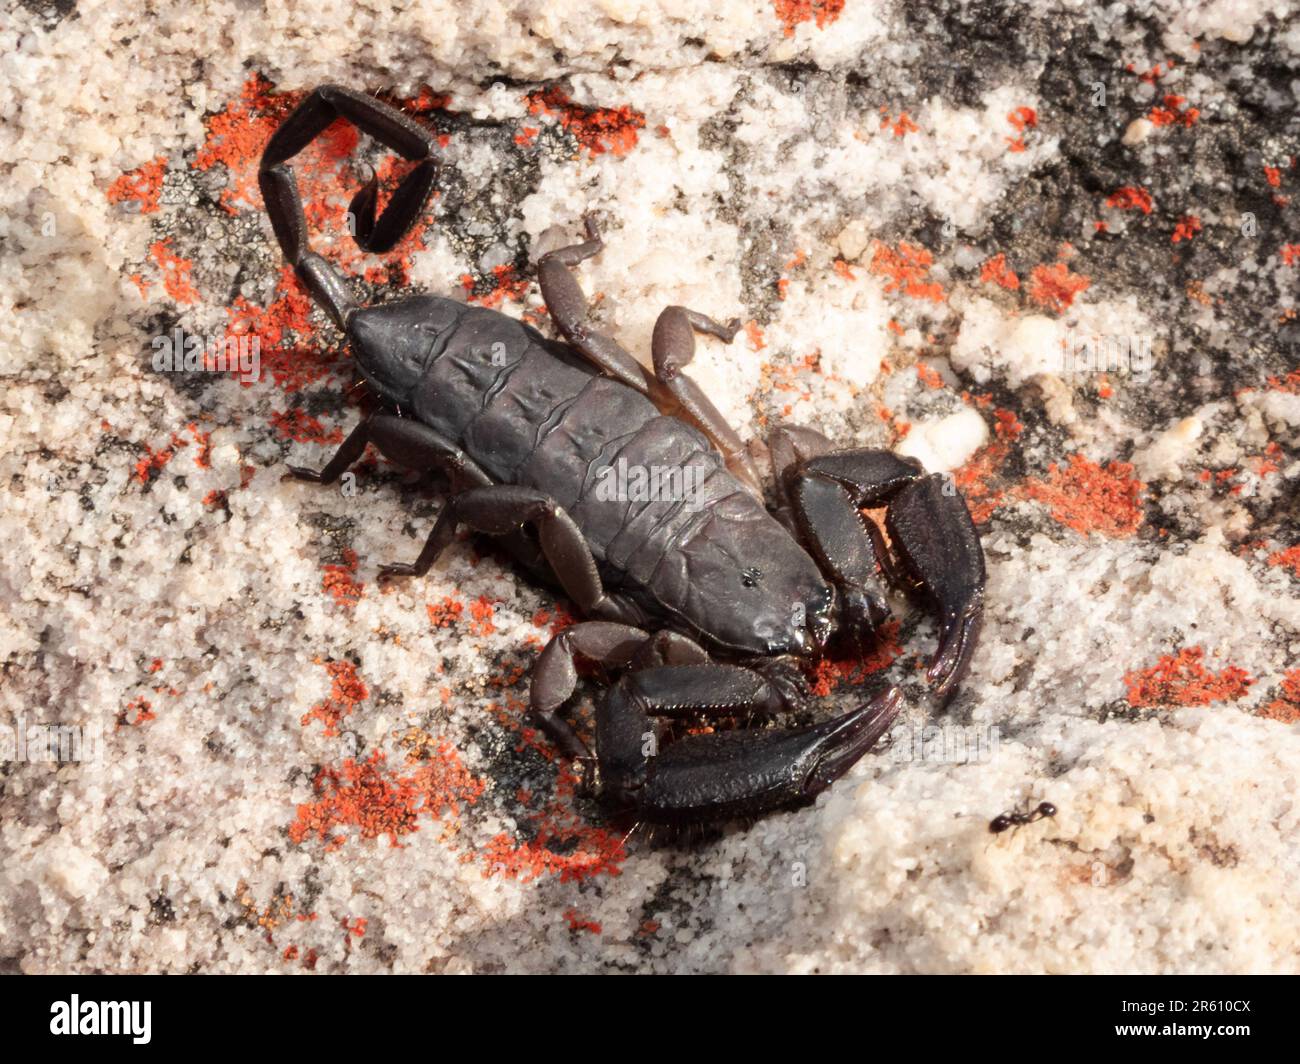 A closeup of a dark brown scorpion on a rock with black and red splotches Stock Photo